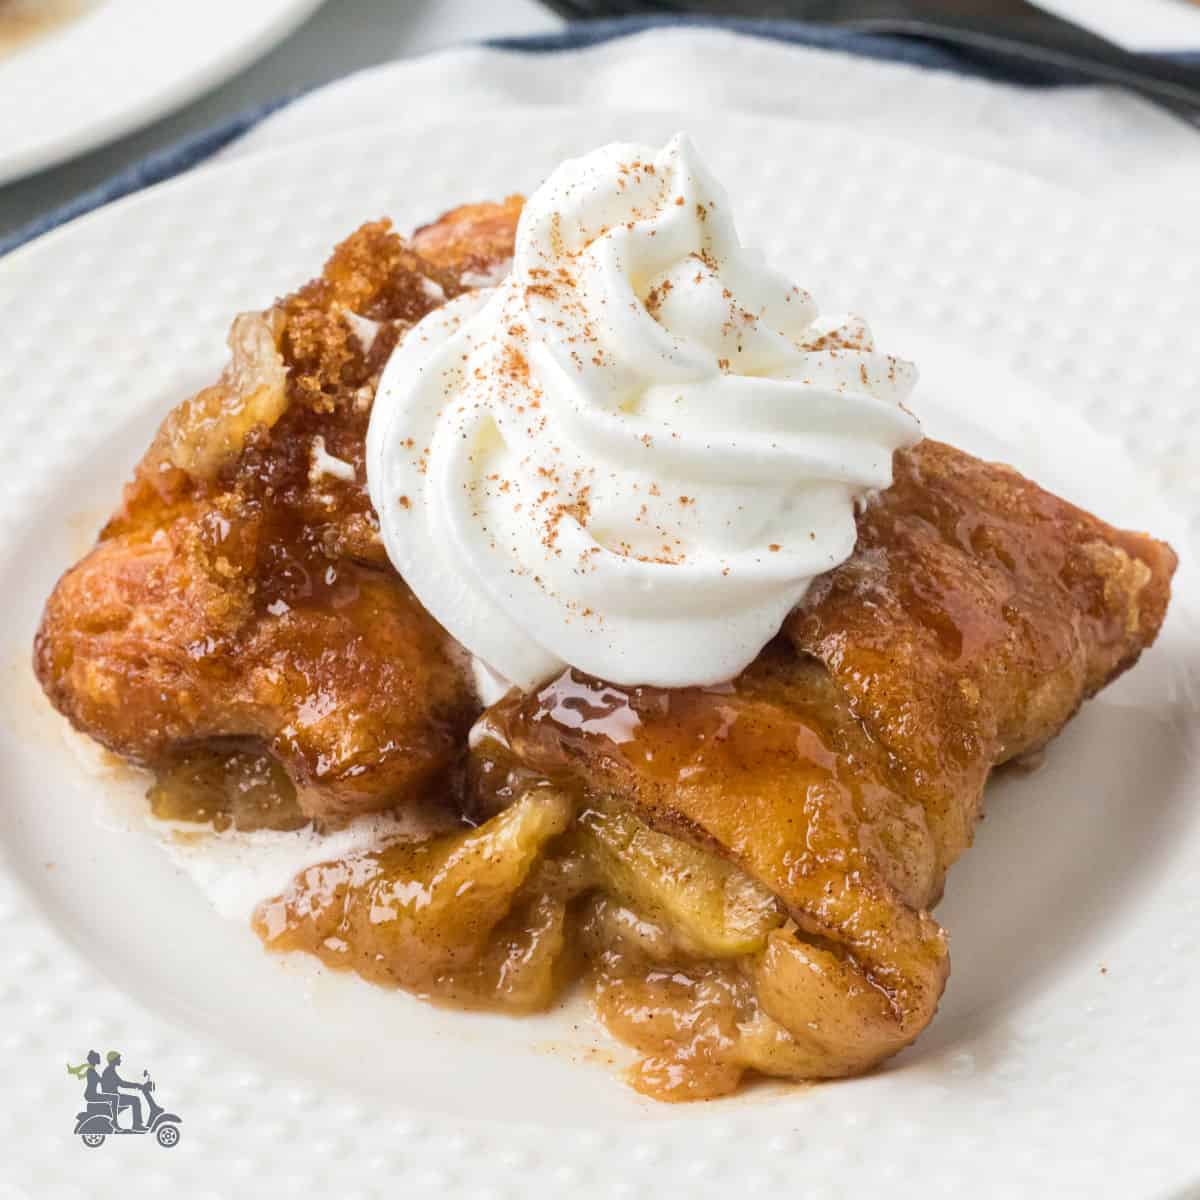 Apples rolled in crescent rolls, baked, and topped with a caramel sauce are served on a white plate with a dollop of whipped cream on top.